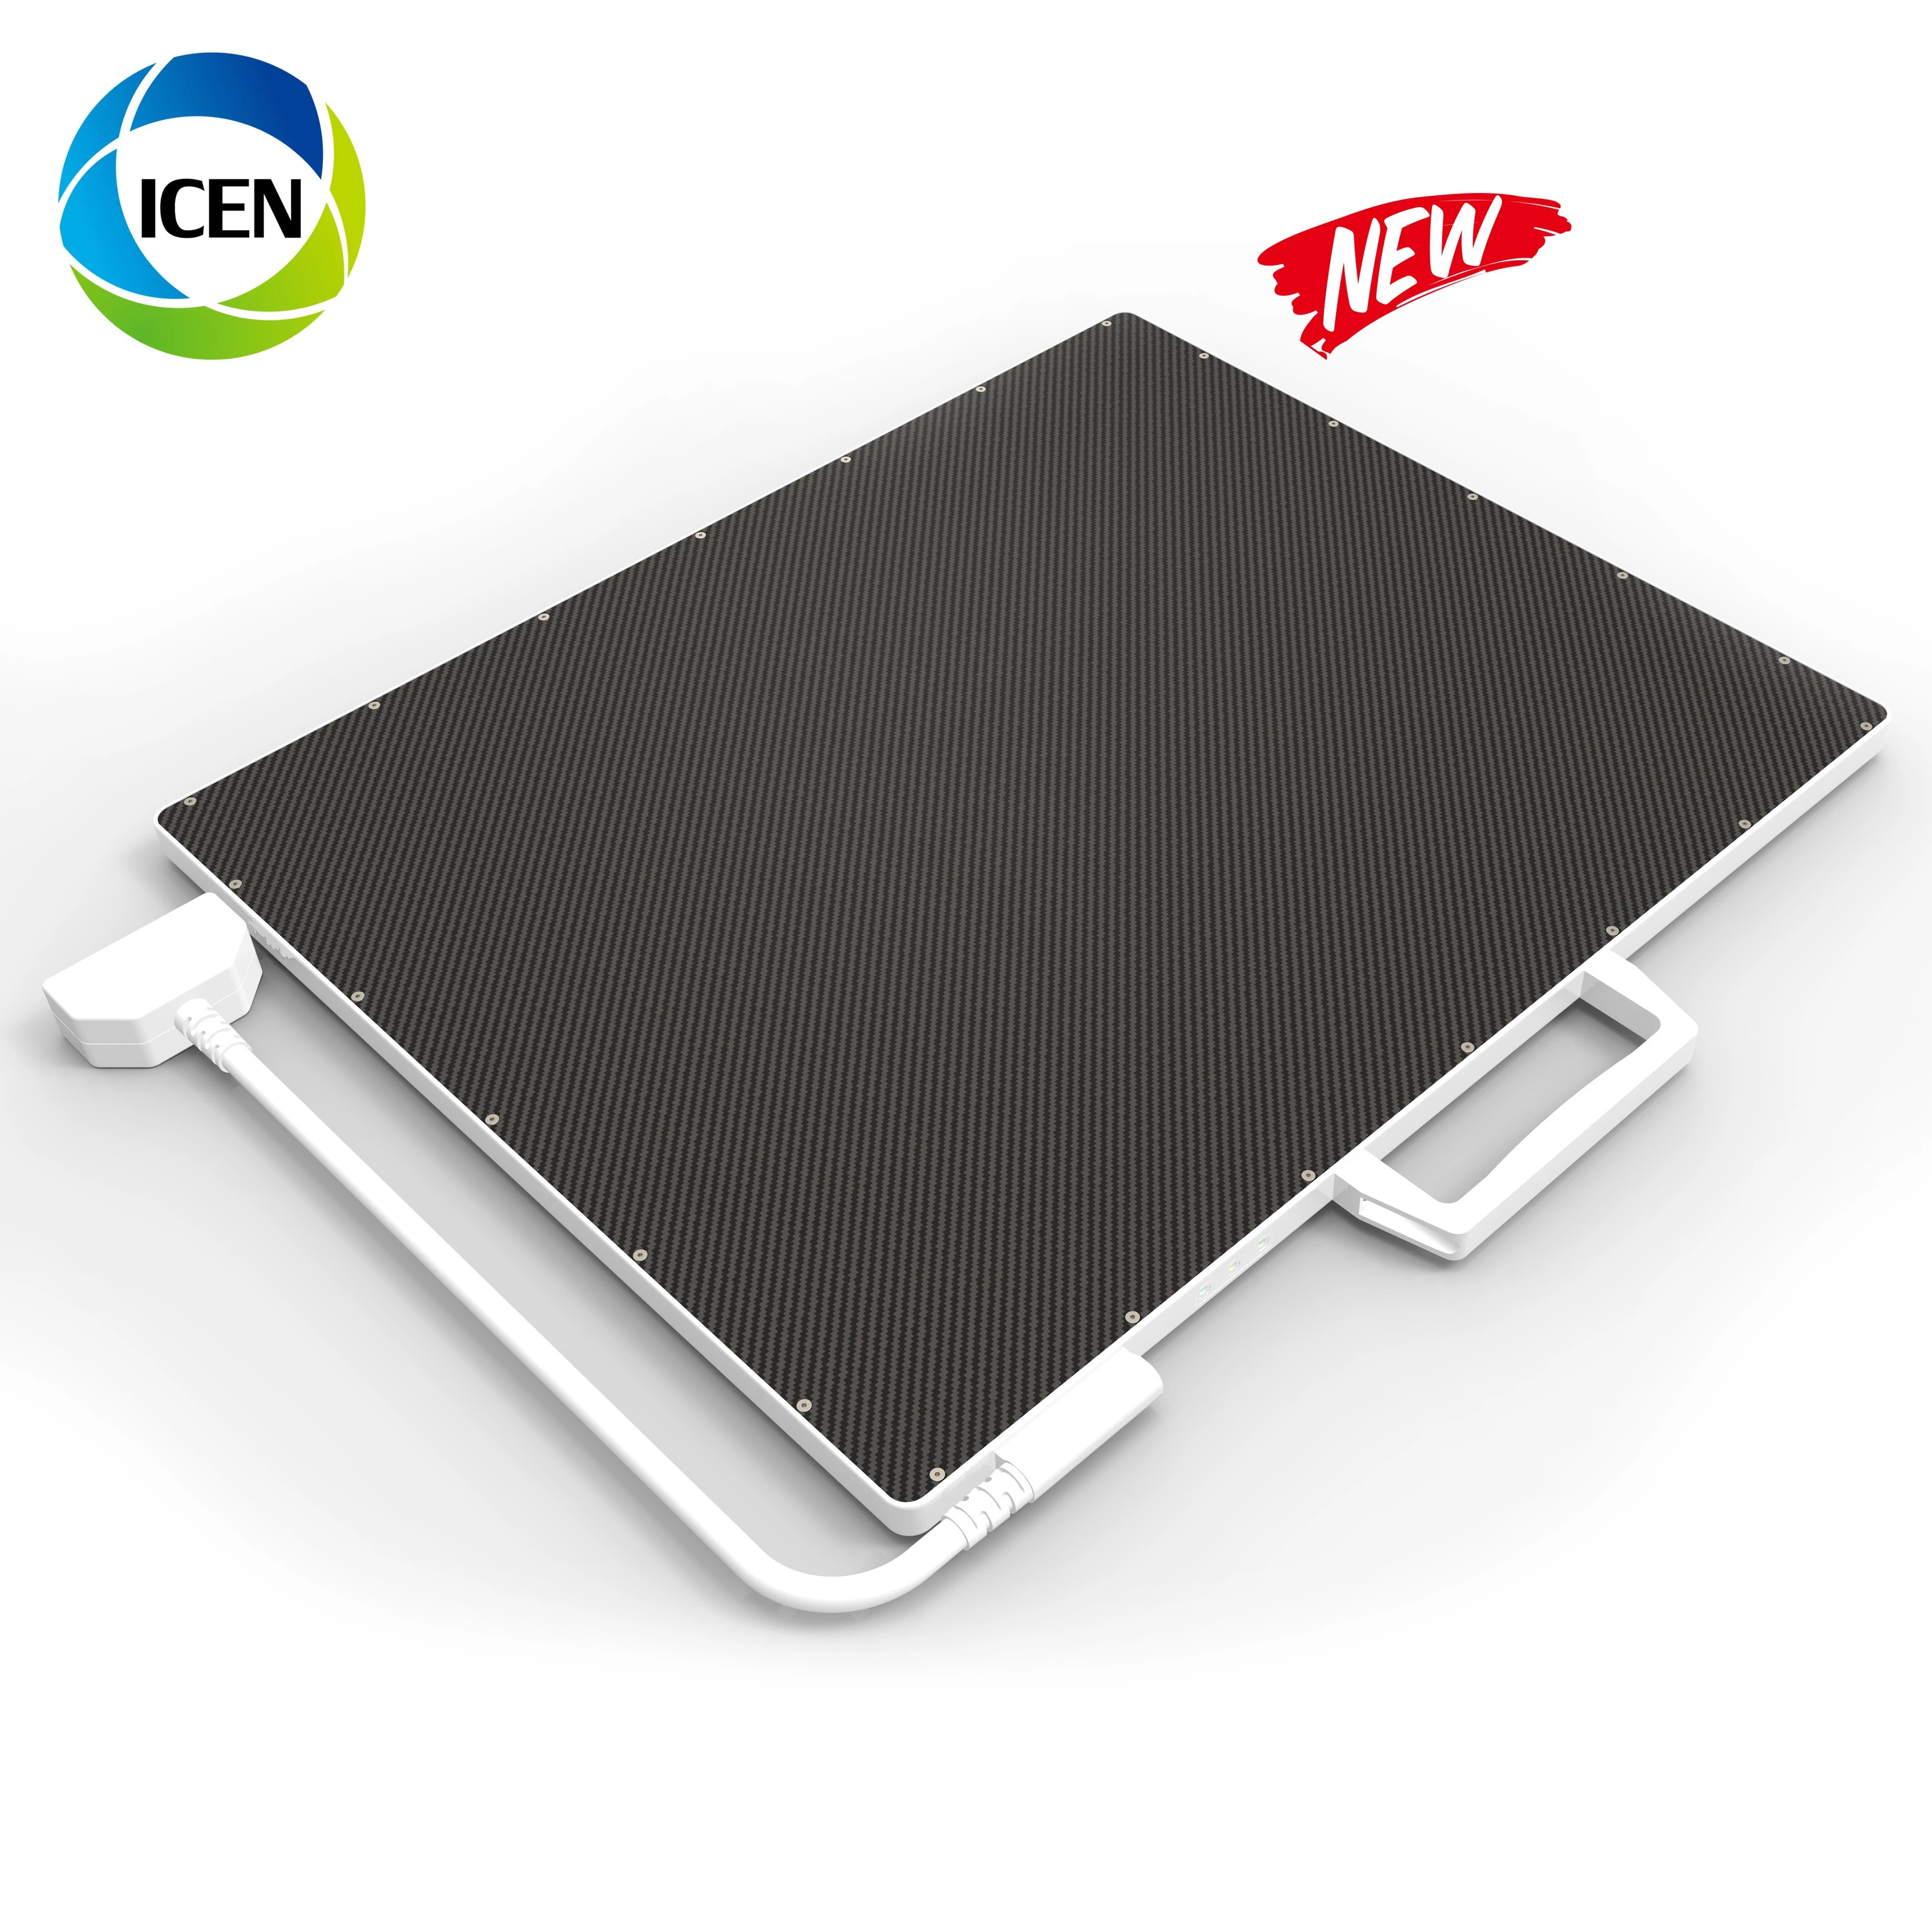 IN-3435 Digital portable high resolution lcd module flat panel x-ray detector